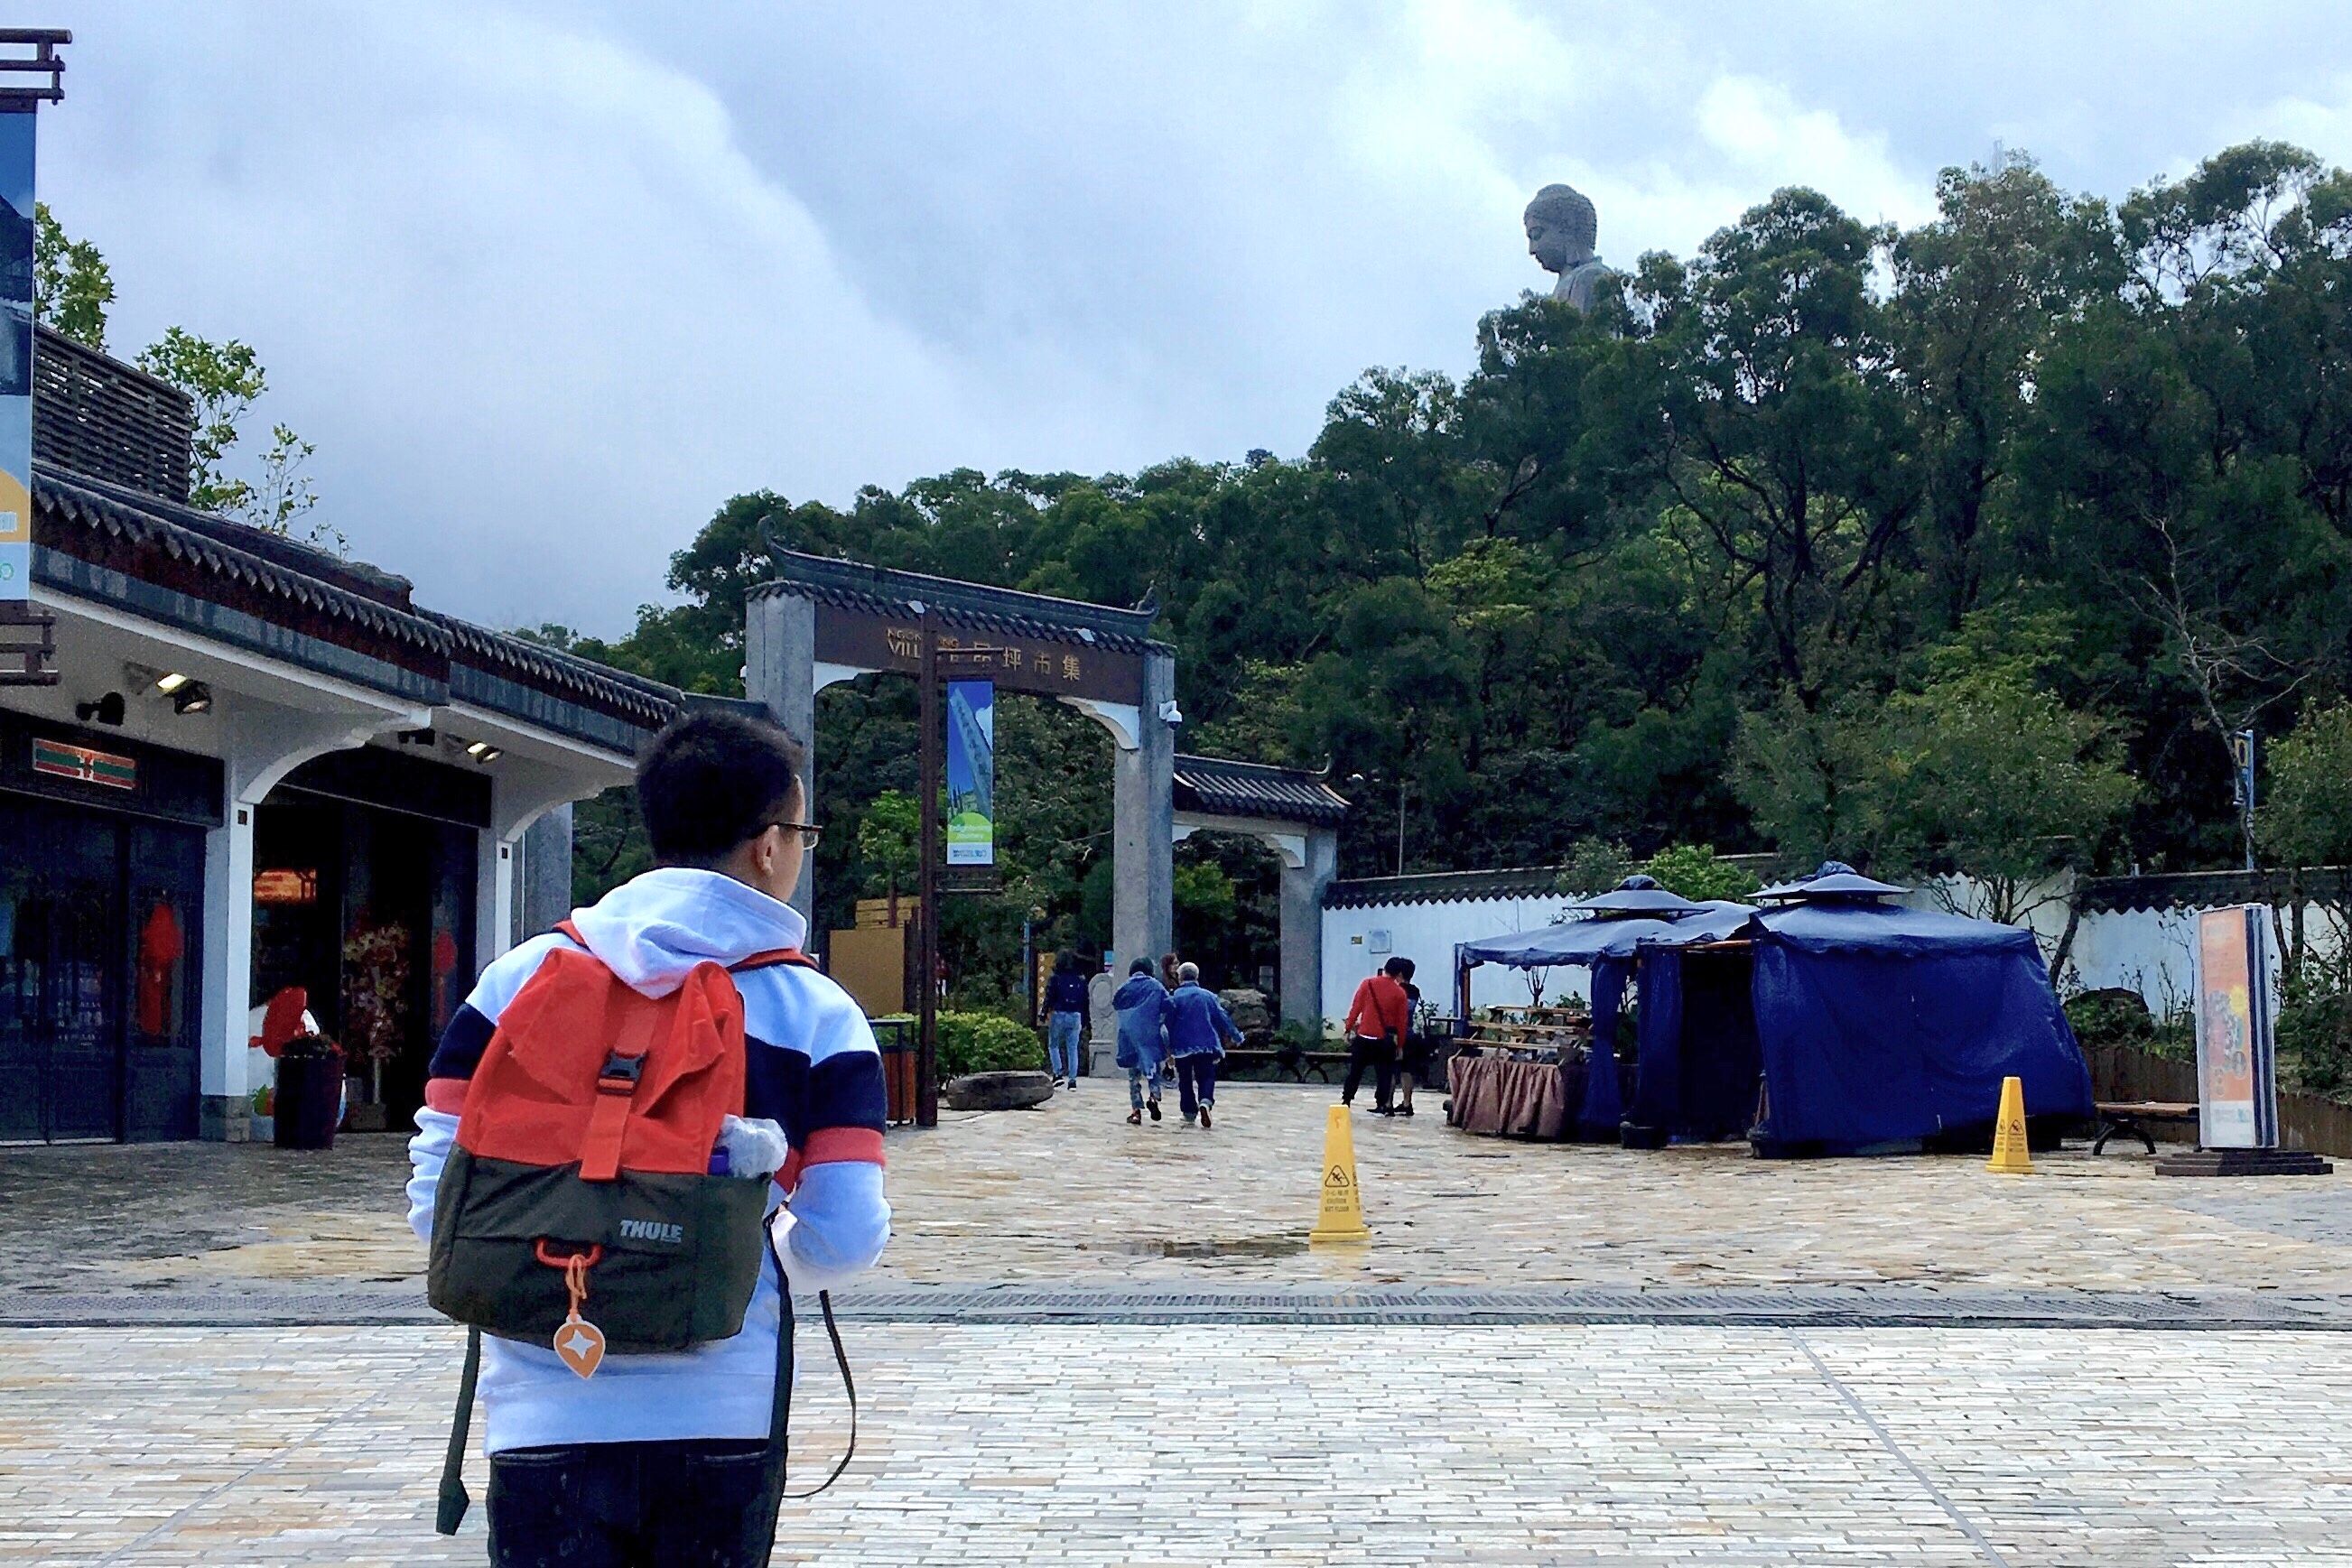 Photo of myself carrying a bag with a small Local Guide name tag  attached to my backpack and walking towards  the Tian Tan Buddha Statue in Hong Kong.